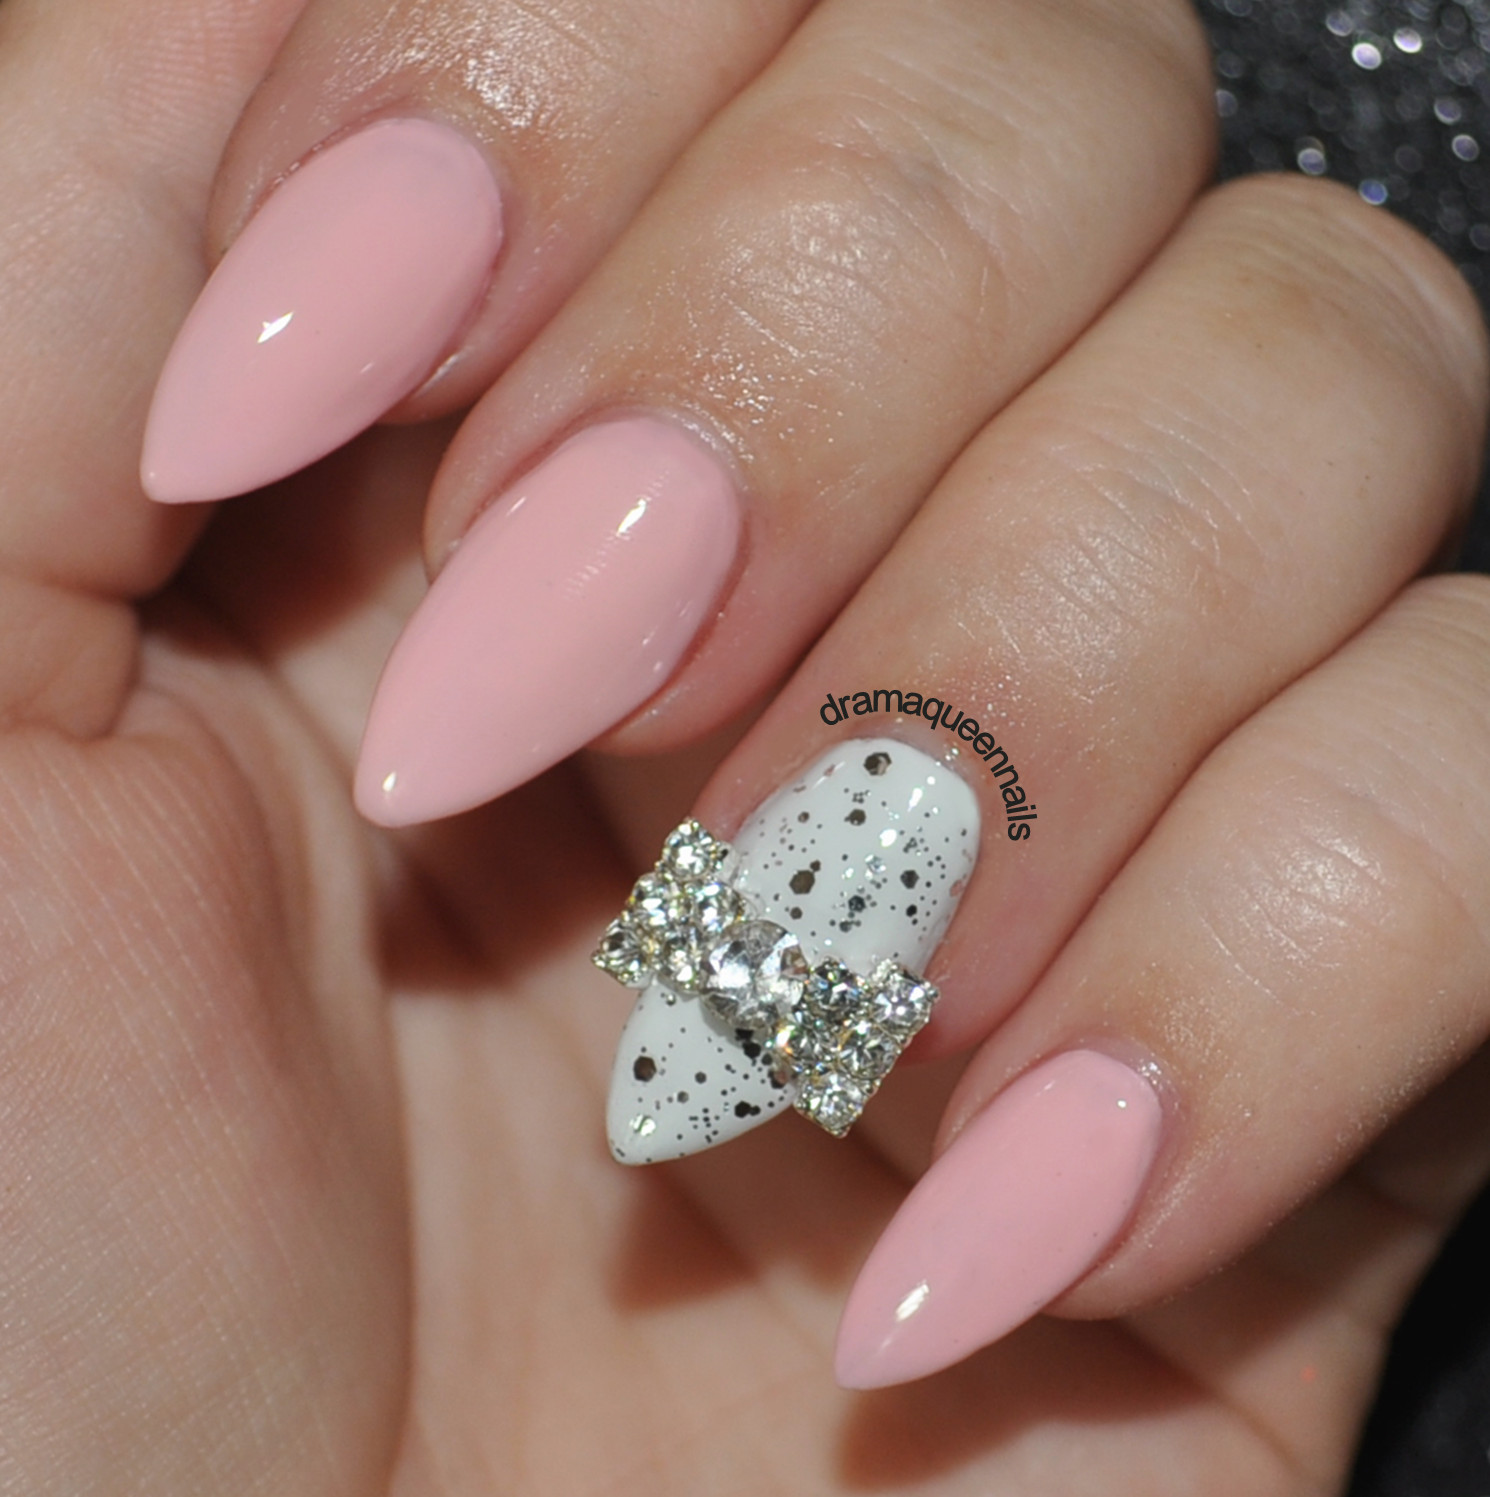 Almond Shaped Nail Designs
 Drama Queen Nails The almond nails experiment